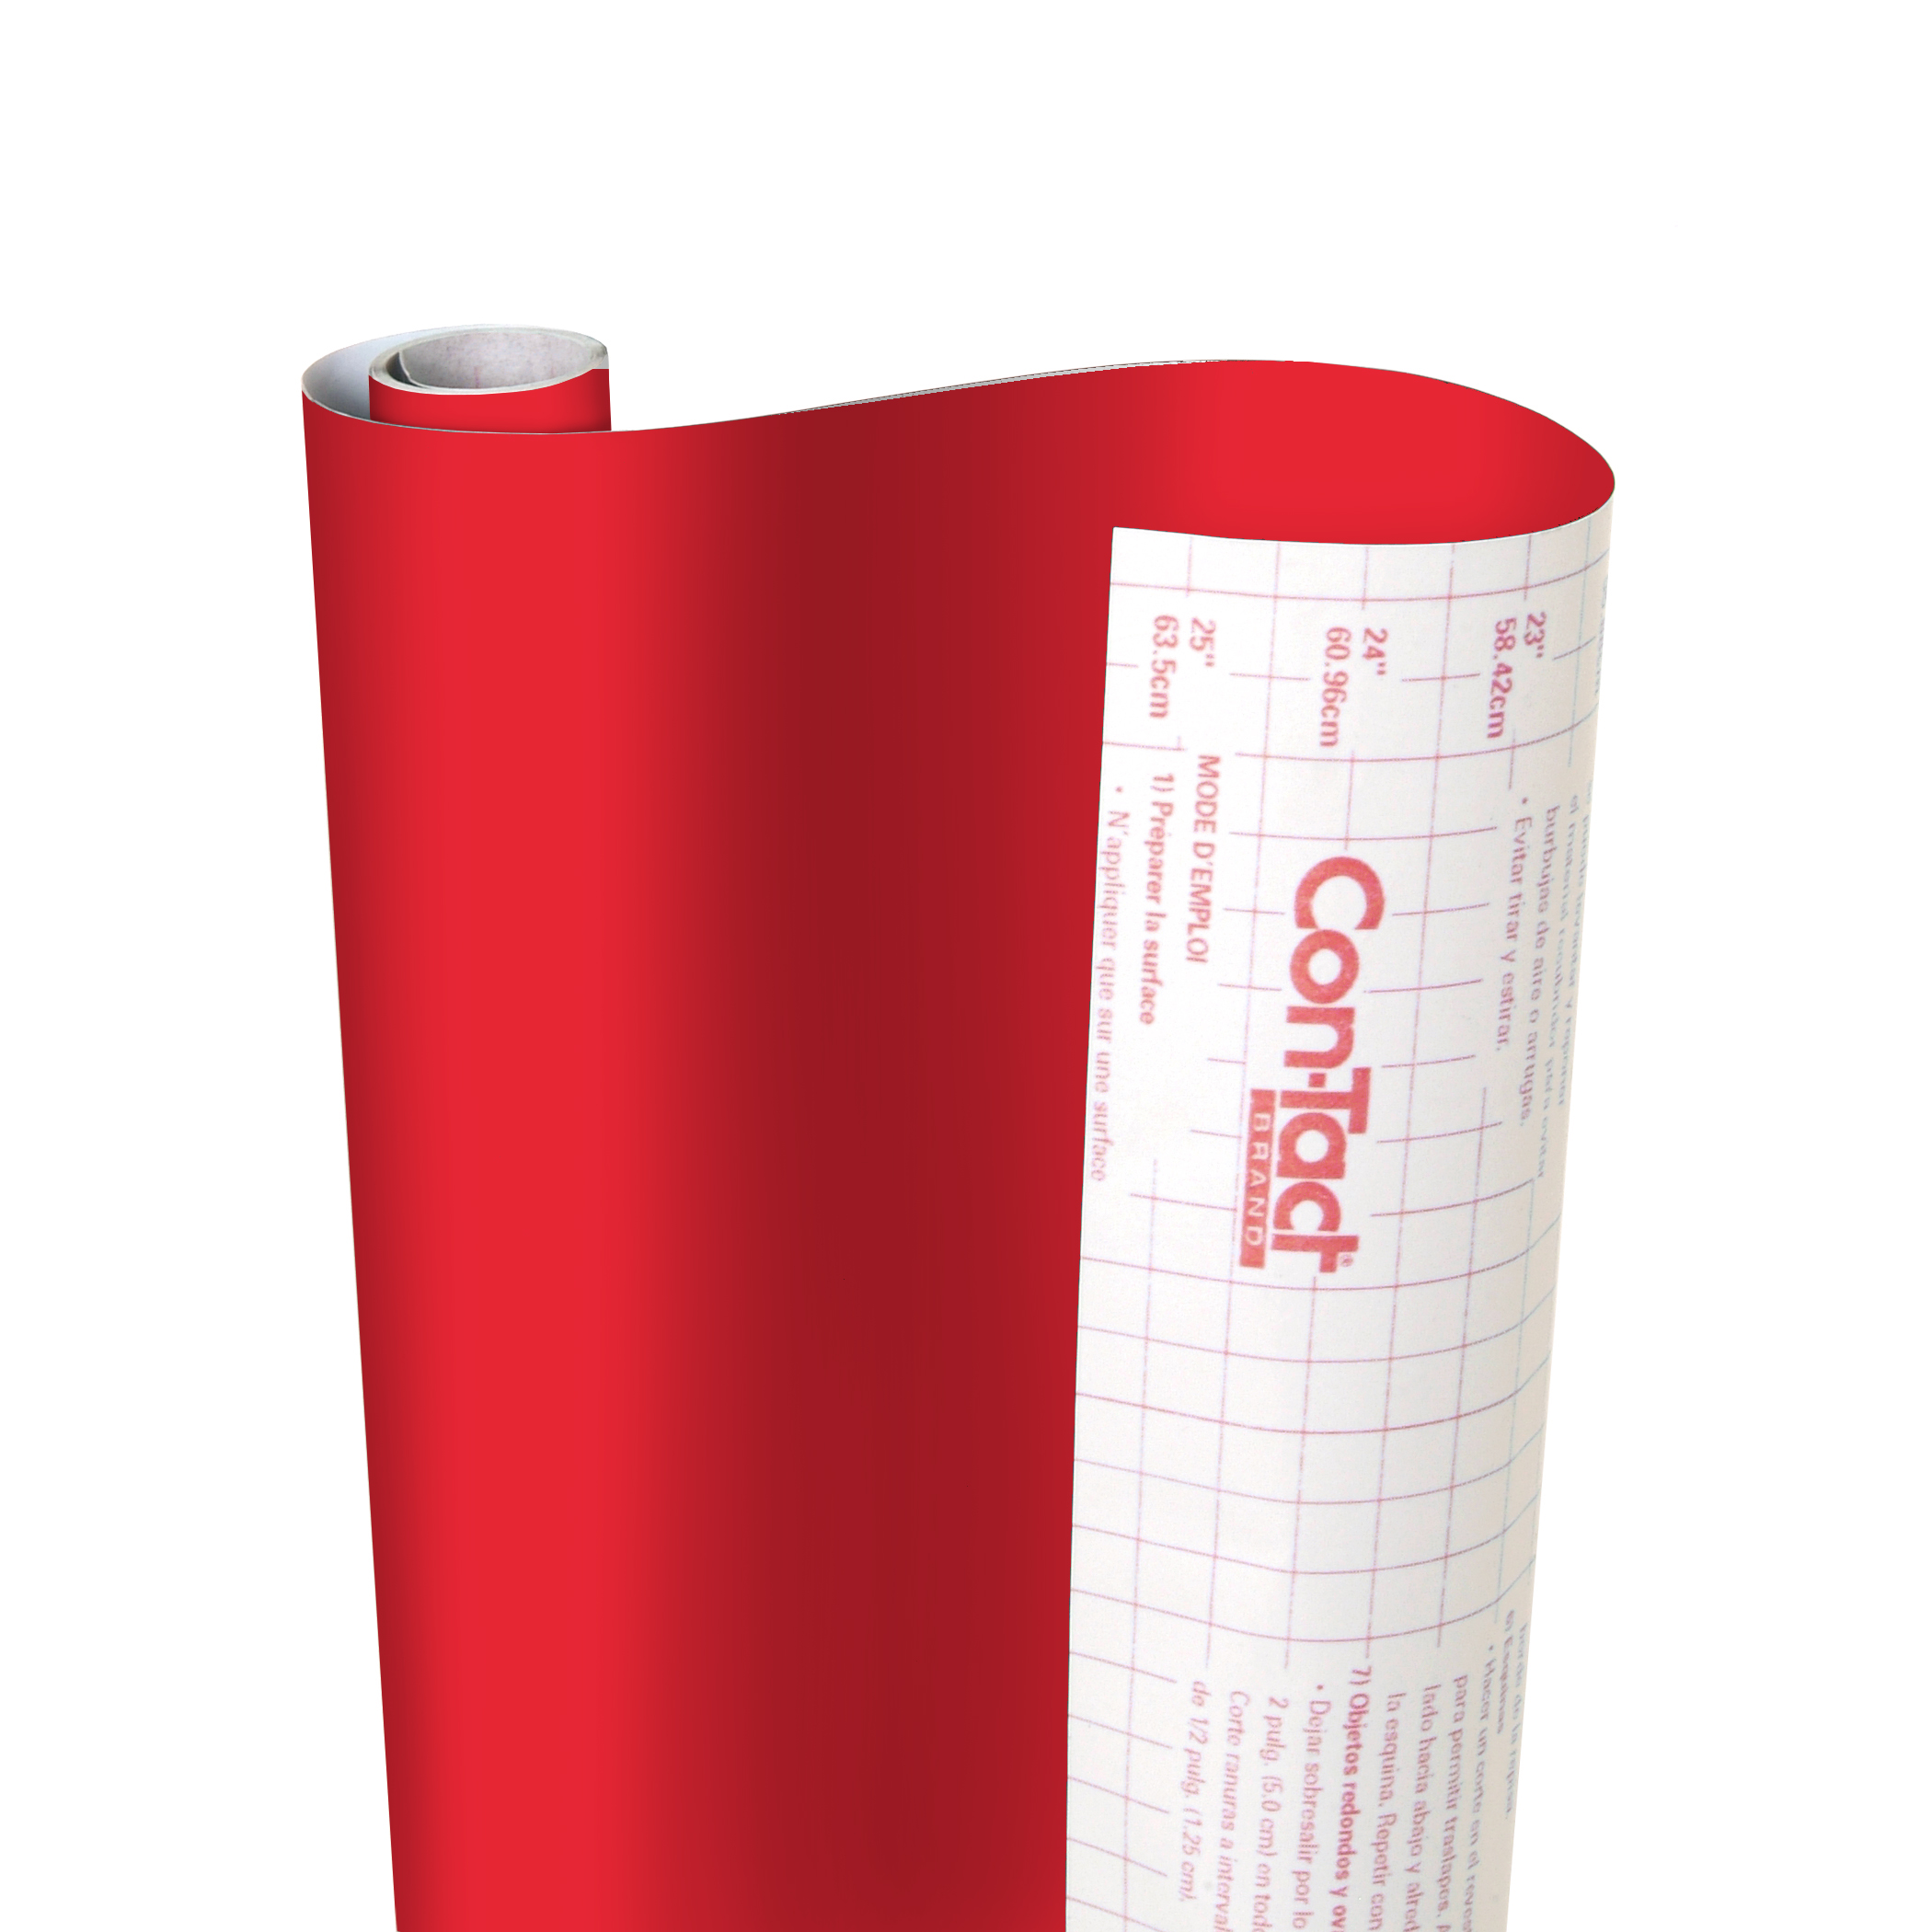 Con-Tact Brand Contact paper Adhesive Shelf Liner 18 in x 9 ft, Red - image 1 of 4